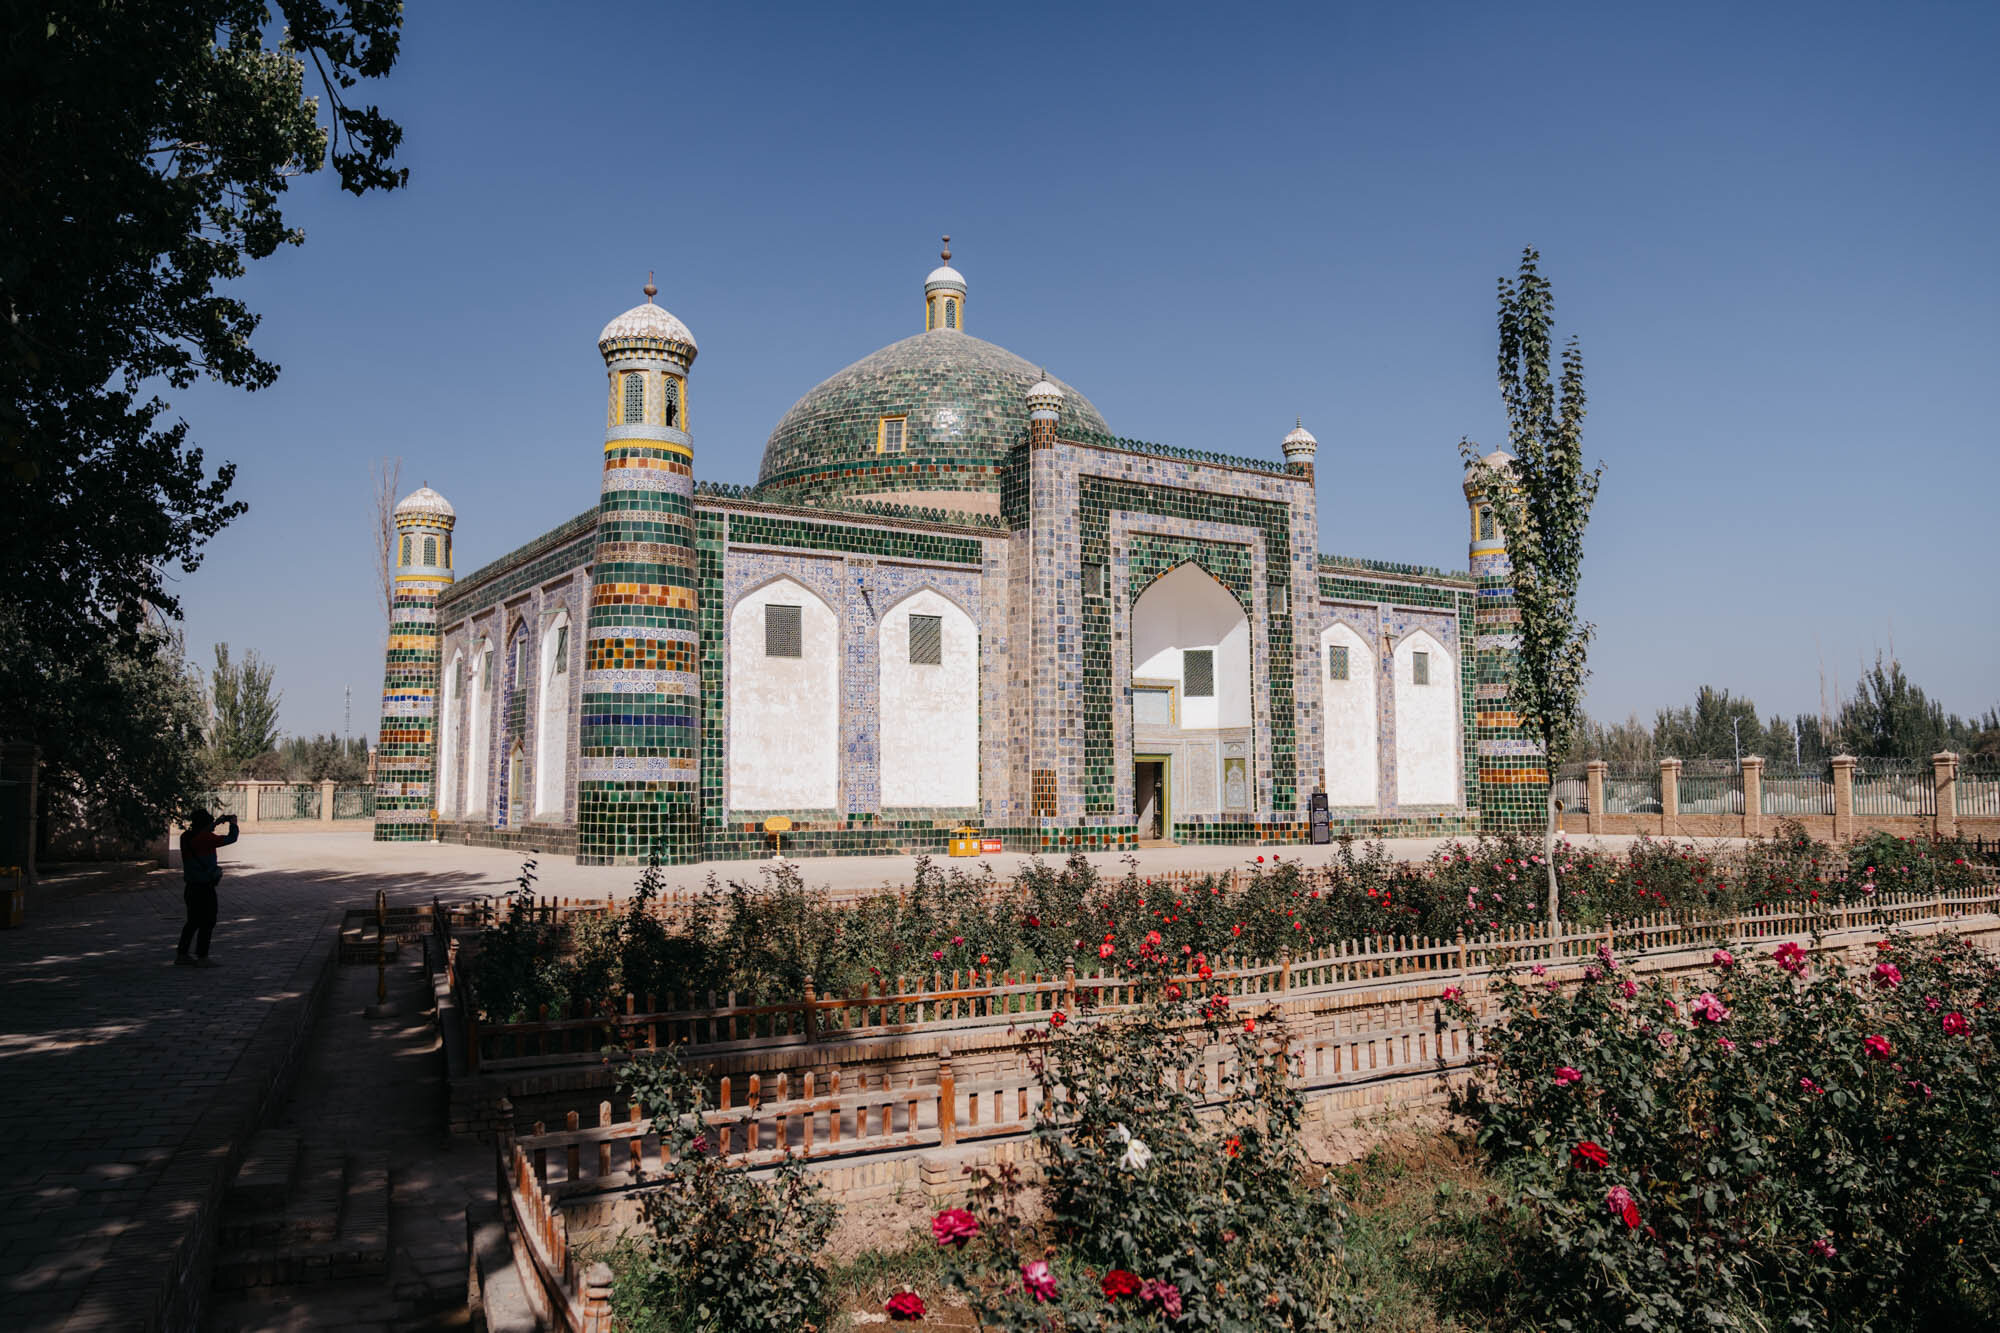  The Afāq Khoja Mausoleum. The mausoleum is one of the holiest Muslim sites in Kashgar. 